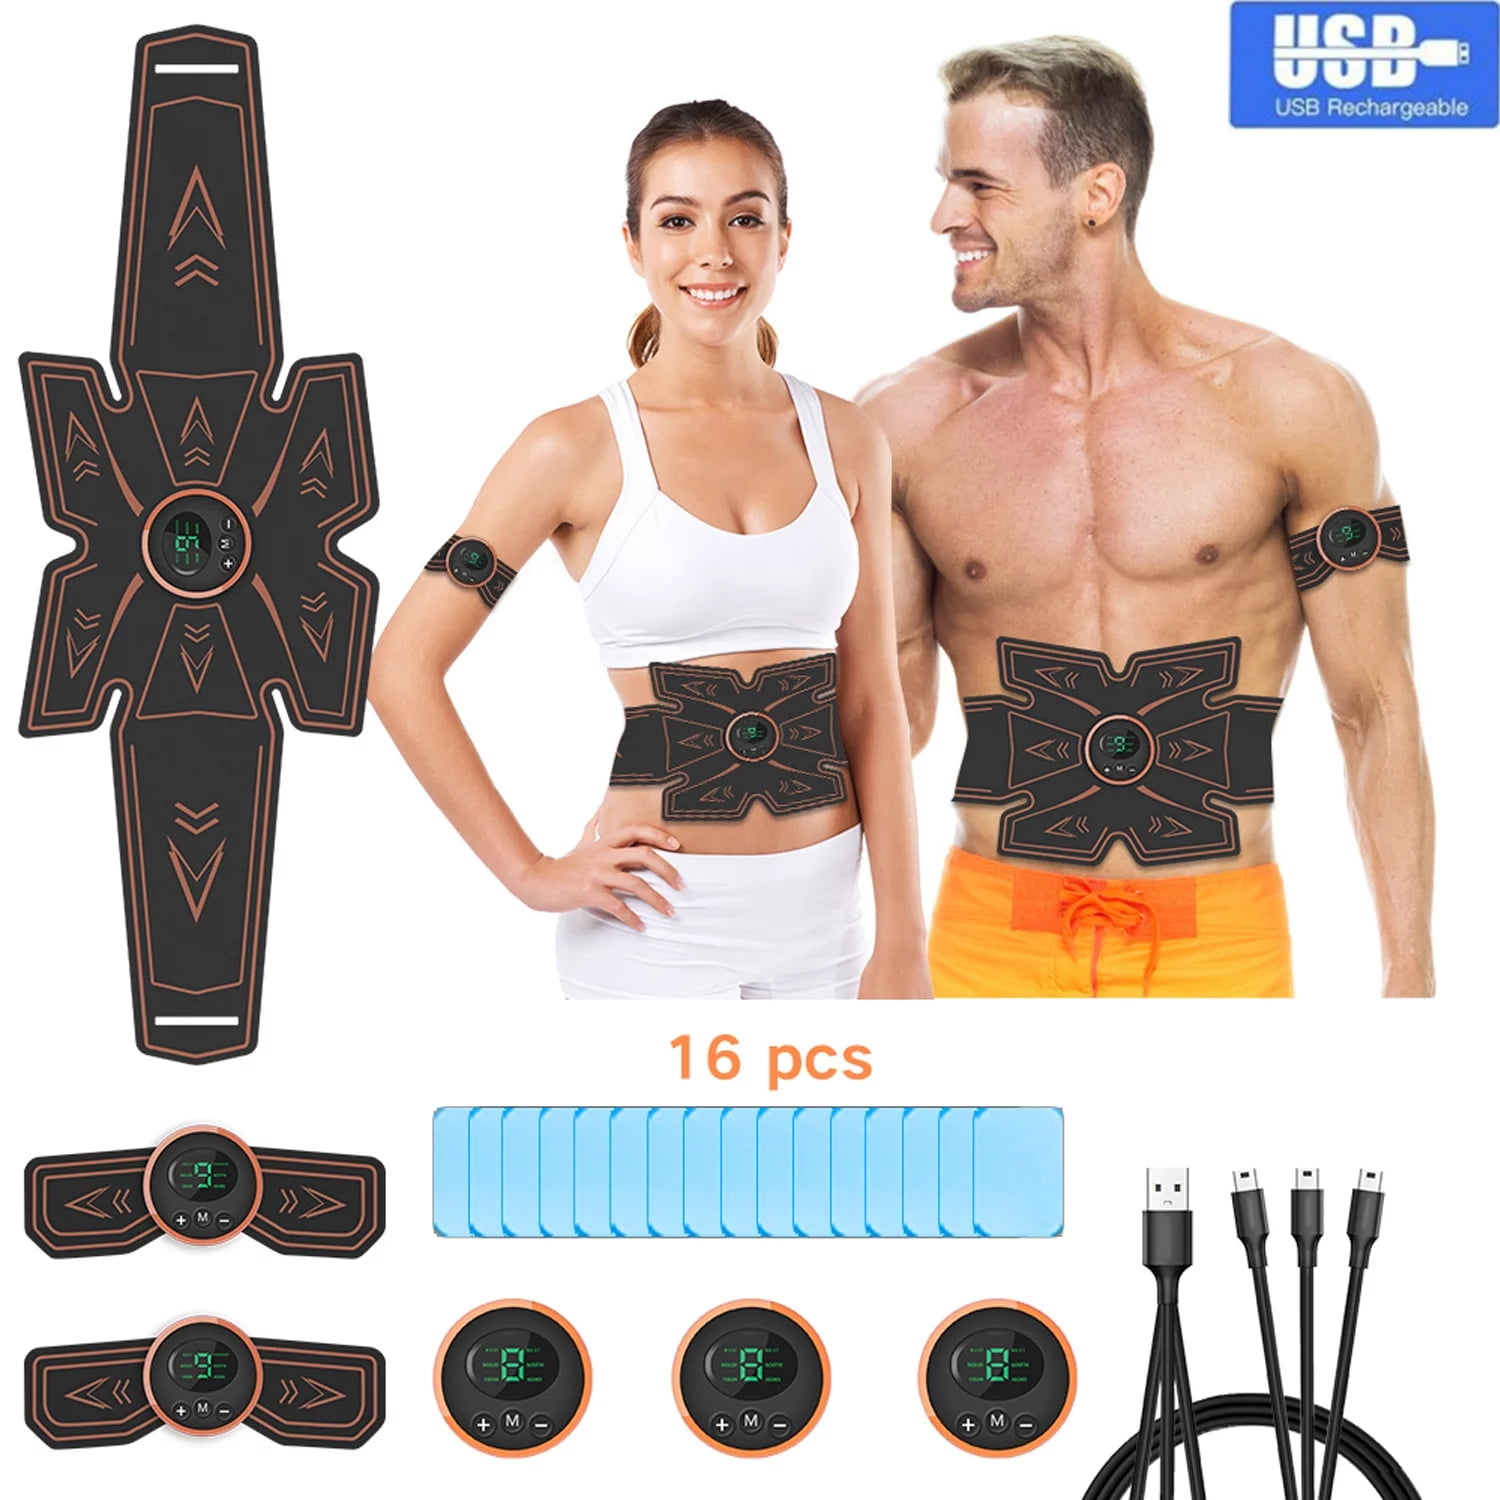 Abs Stimulator Ab Stimulator Rechargeable Ultimate Abs Stimulator for Men  Women Abdominal Work Out Abs Power Fitness Abs Muscle Training Workout  Equipment Portable 